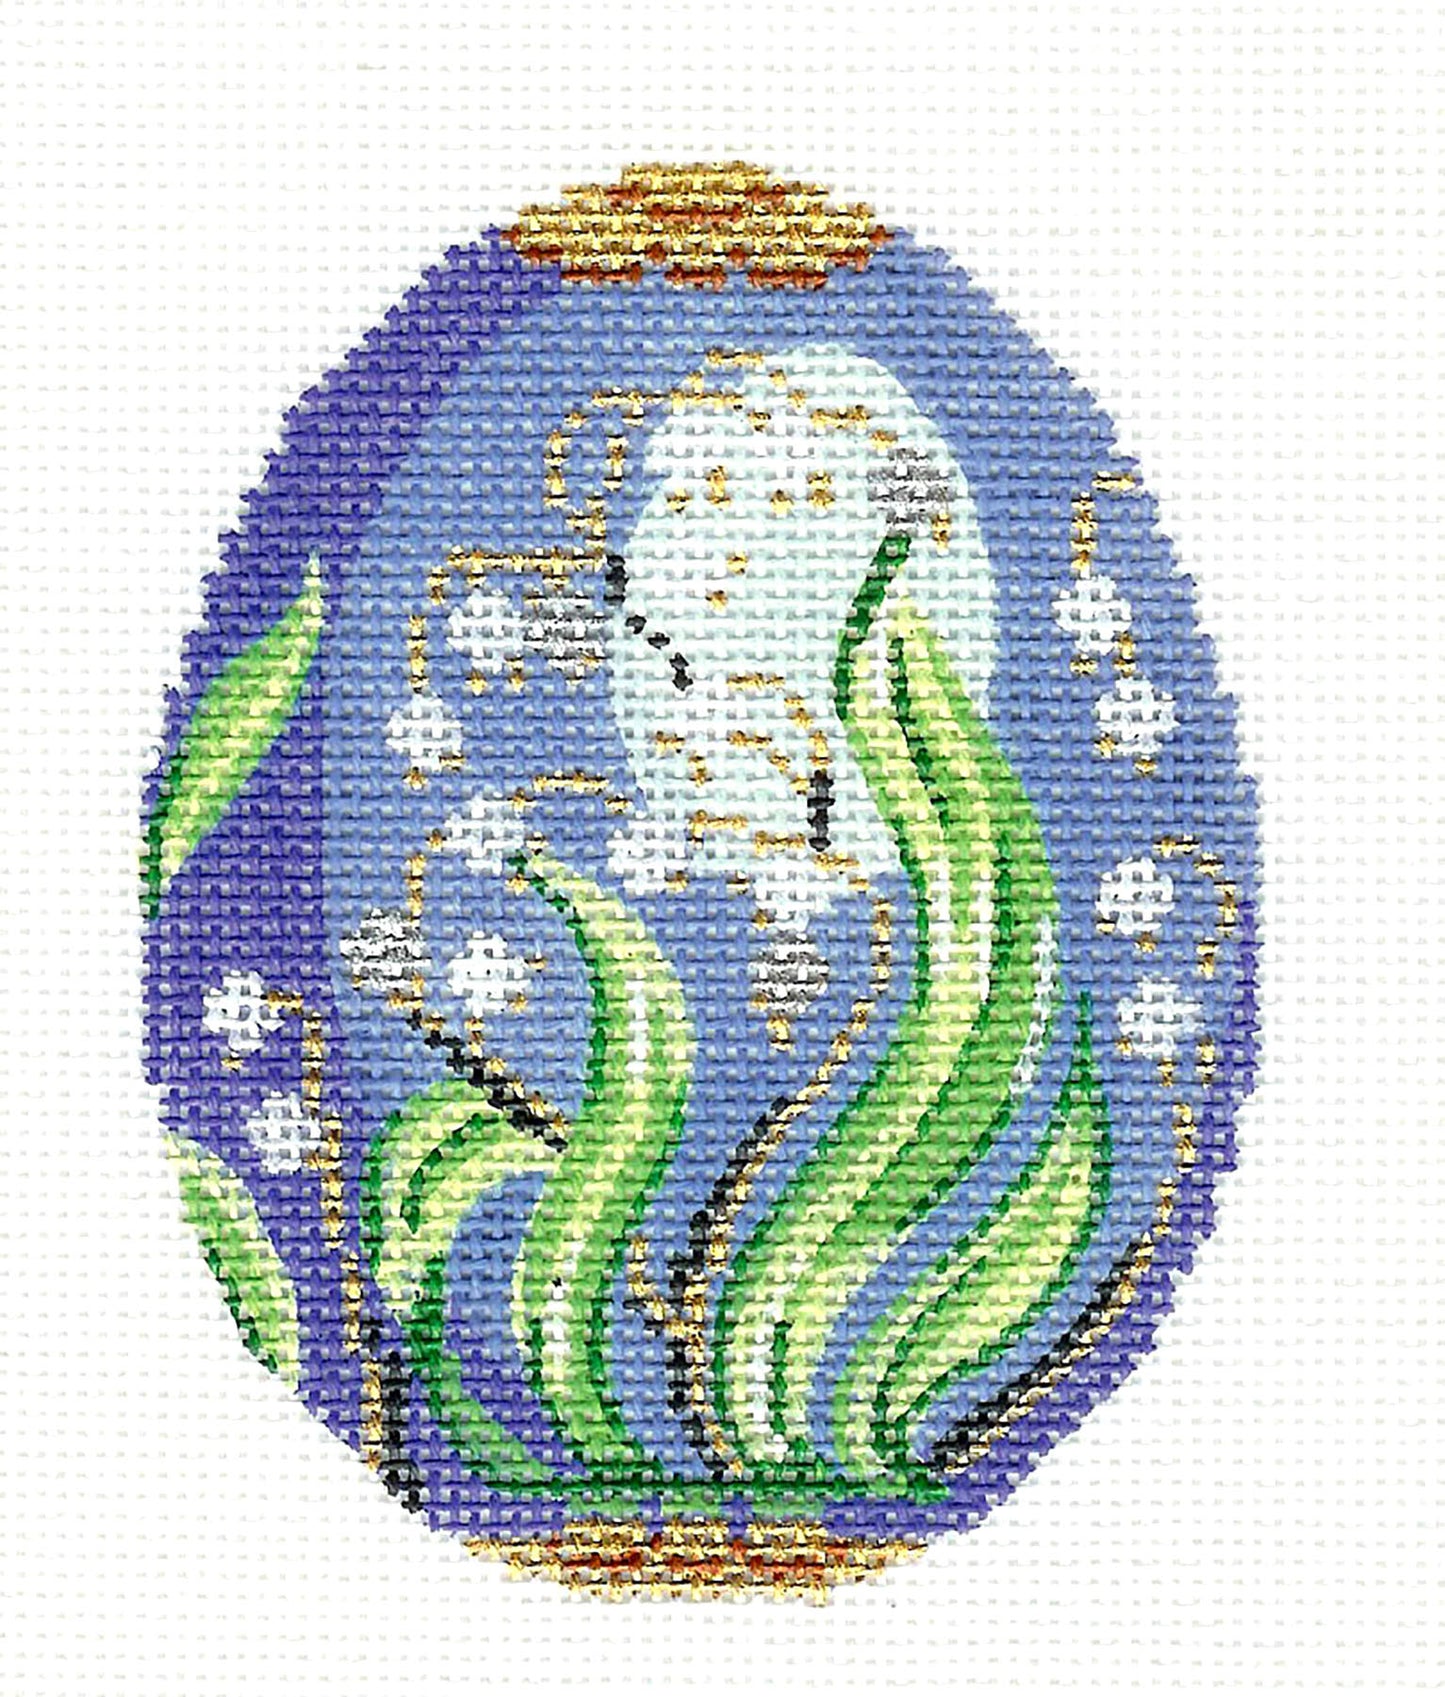 Faberge Egg ~ Jeweled Lily of the Valley Egg on Blue handpainted 18mesh Needlepoint Canvas by LEE